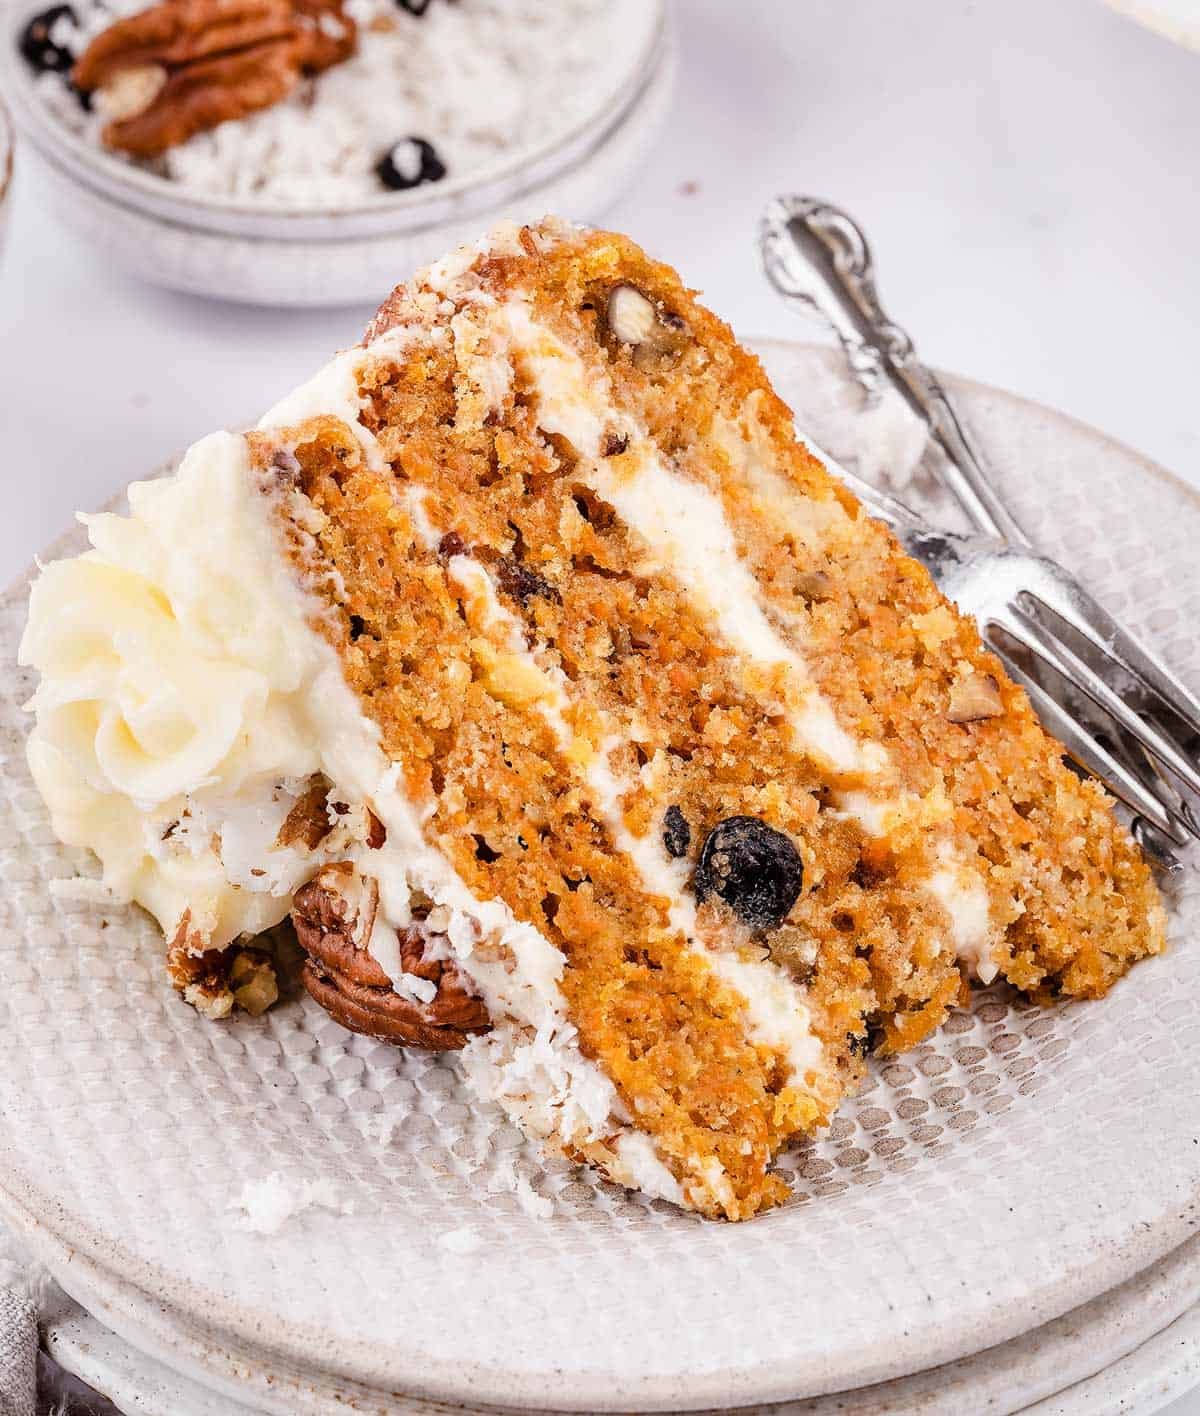 A slice of carrot cake with pineapple and coconut on a plate. 	This is my favorite recipe for homemade carrot cake.